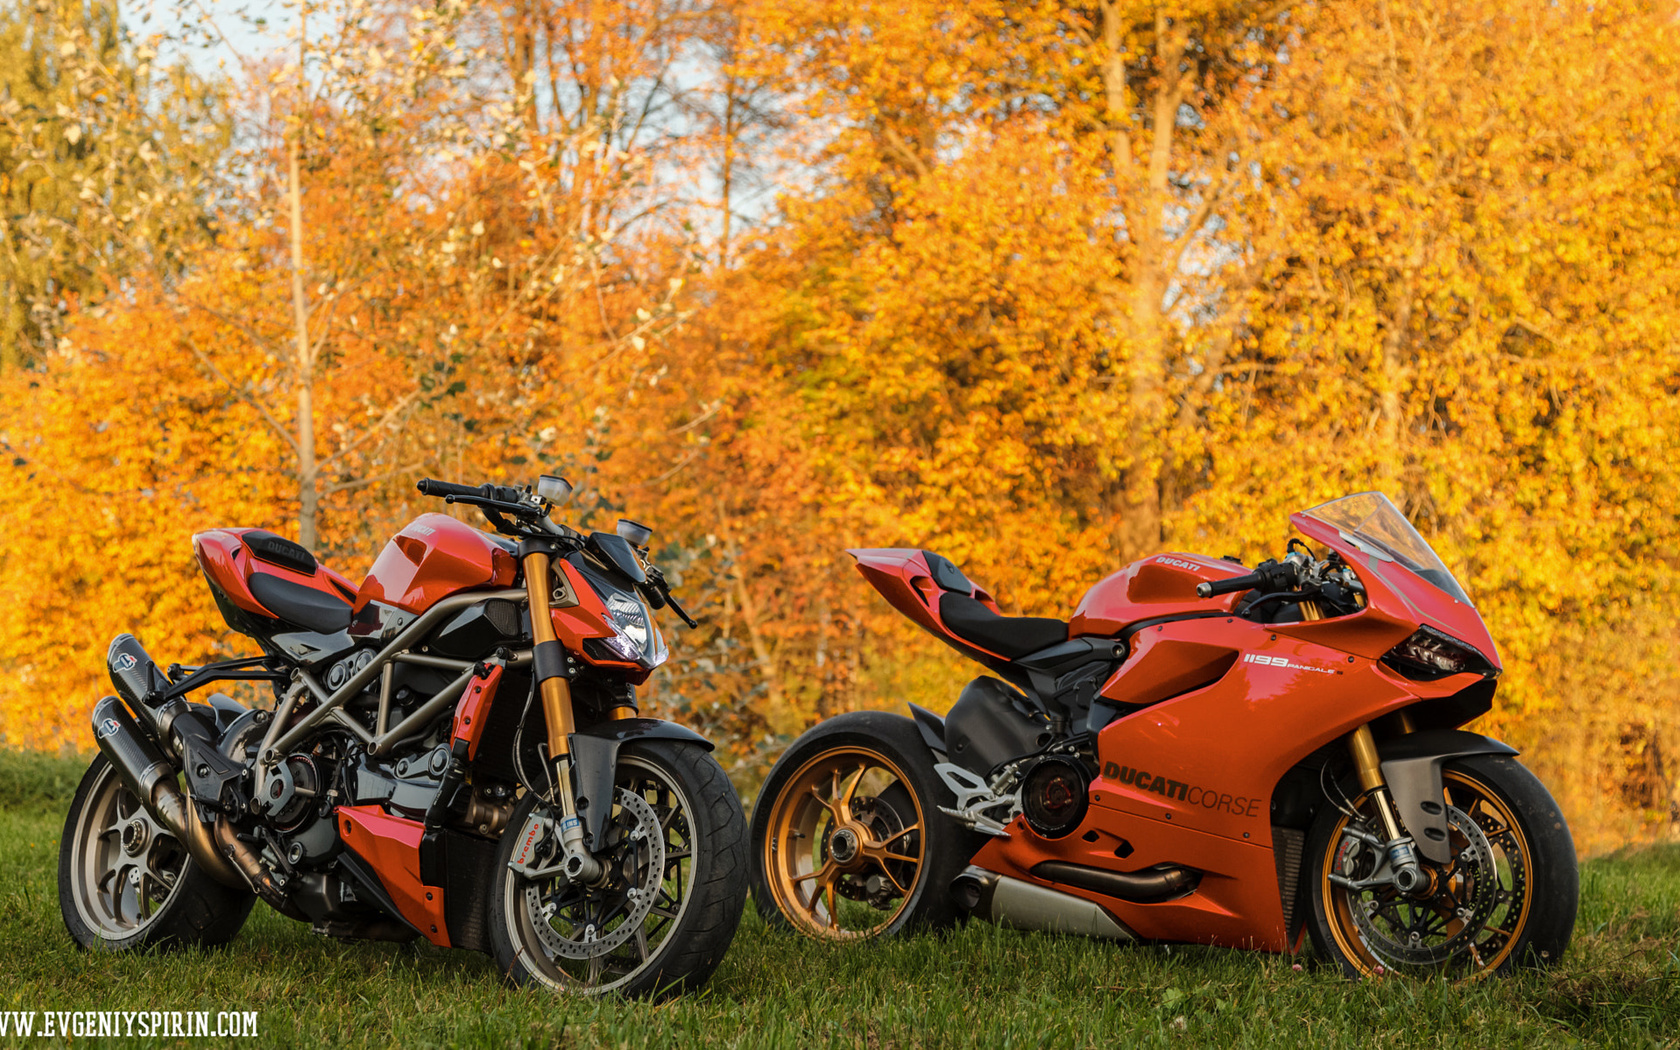 500px, motorcycle, fall, leaves, orange, ducati 1199 panigale, ducati streetfighter s